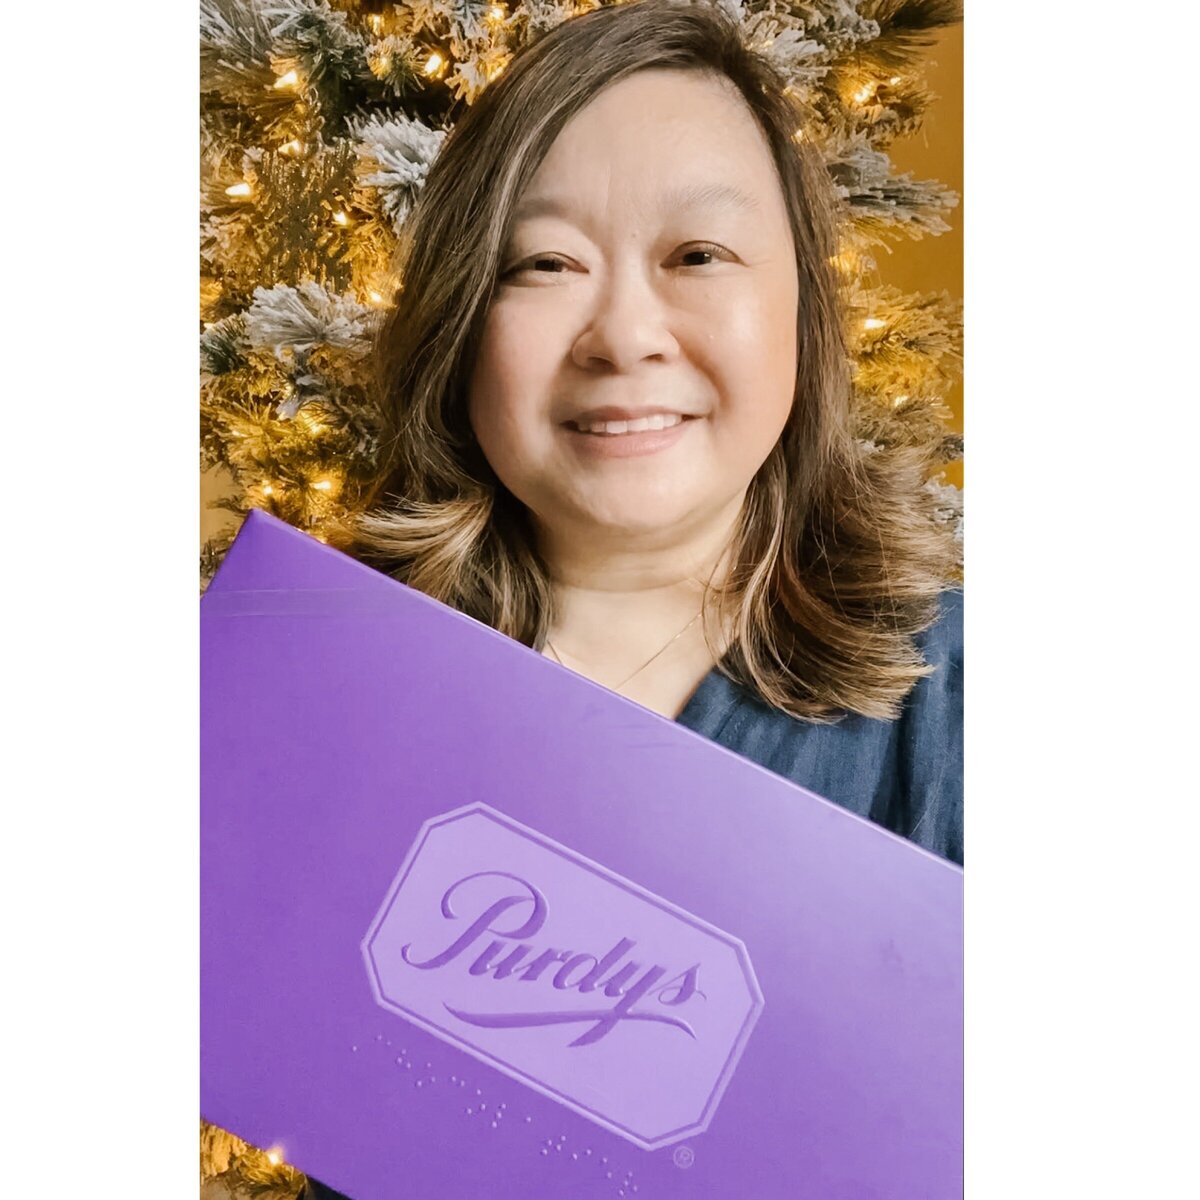 The Purdys Holiday Braille Box